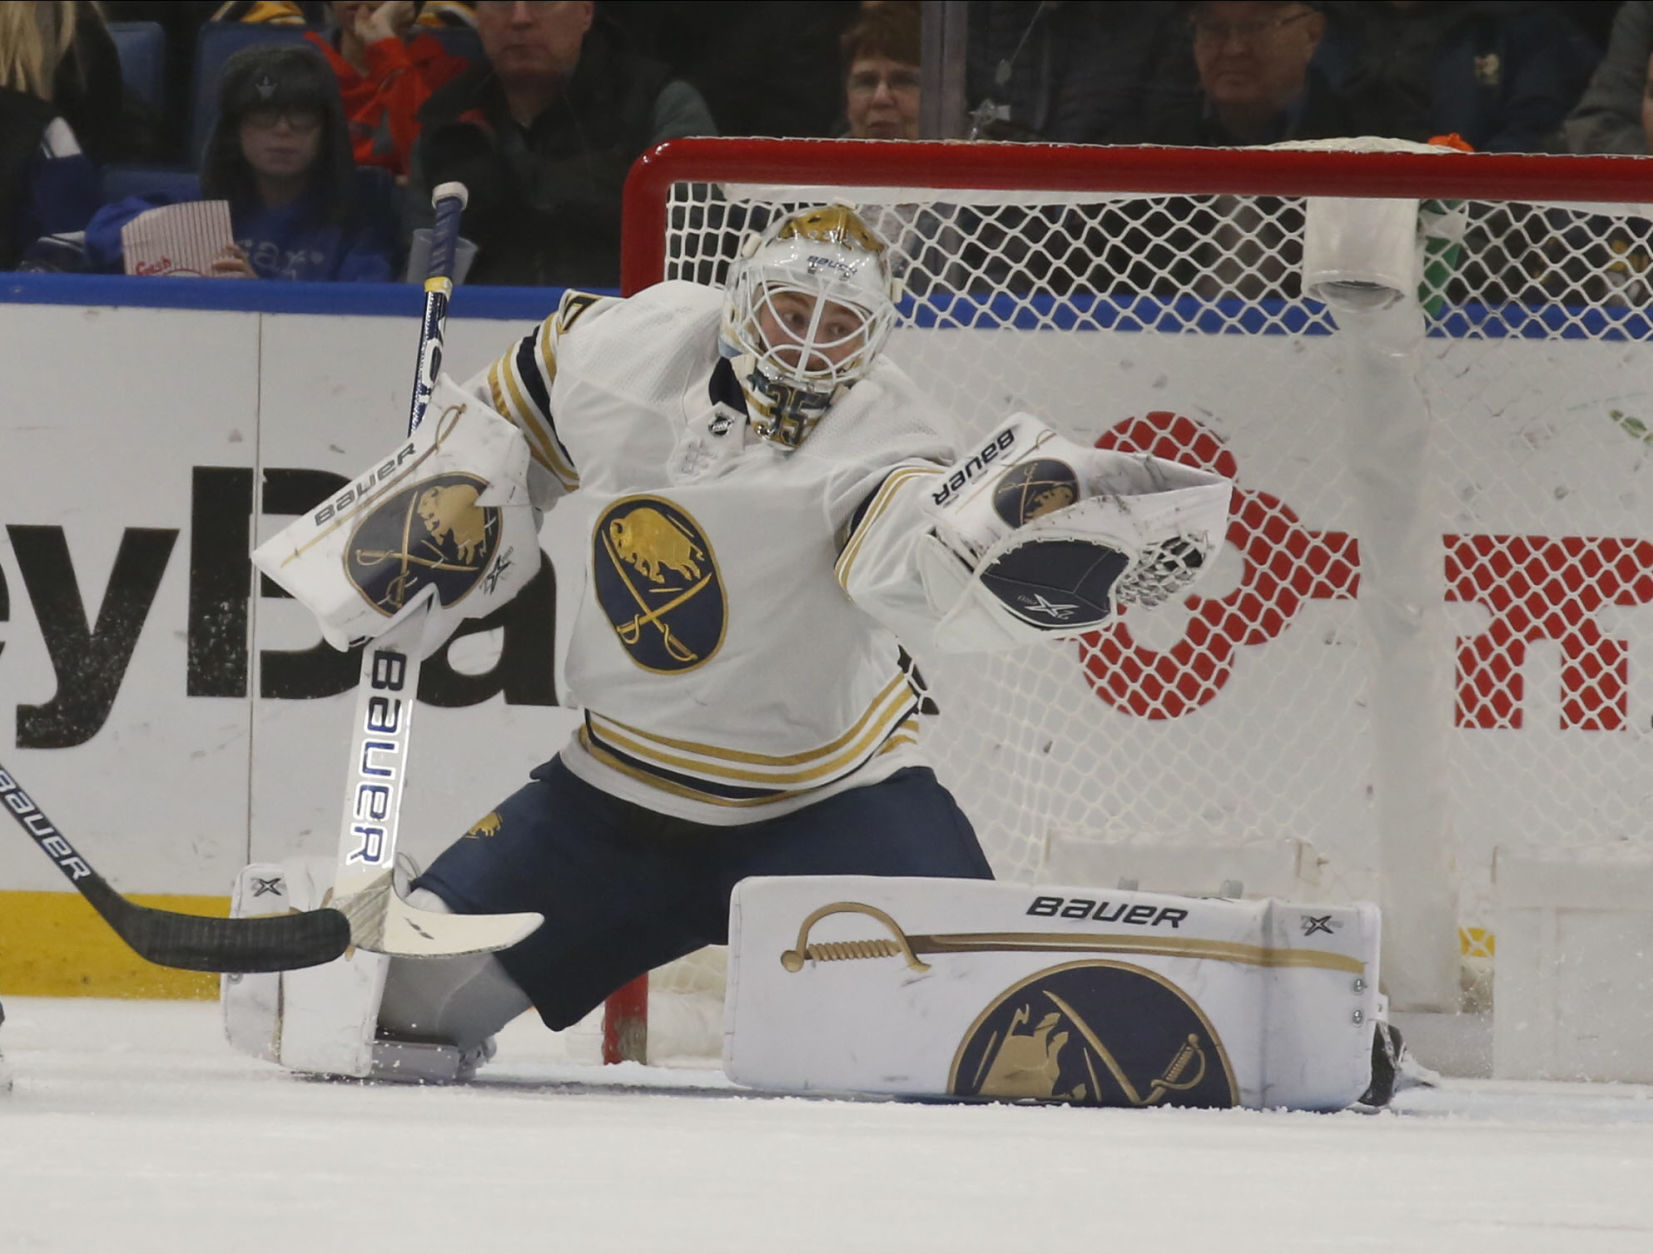 who is the goalie for the buffalo sabres